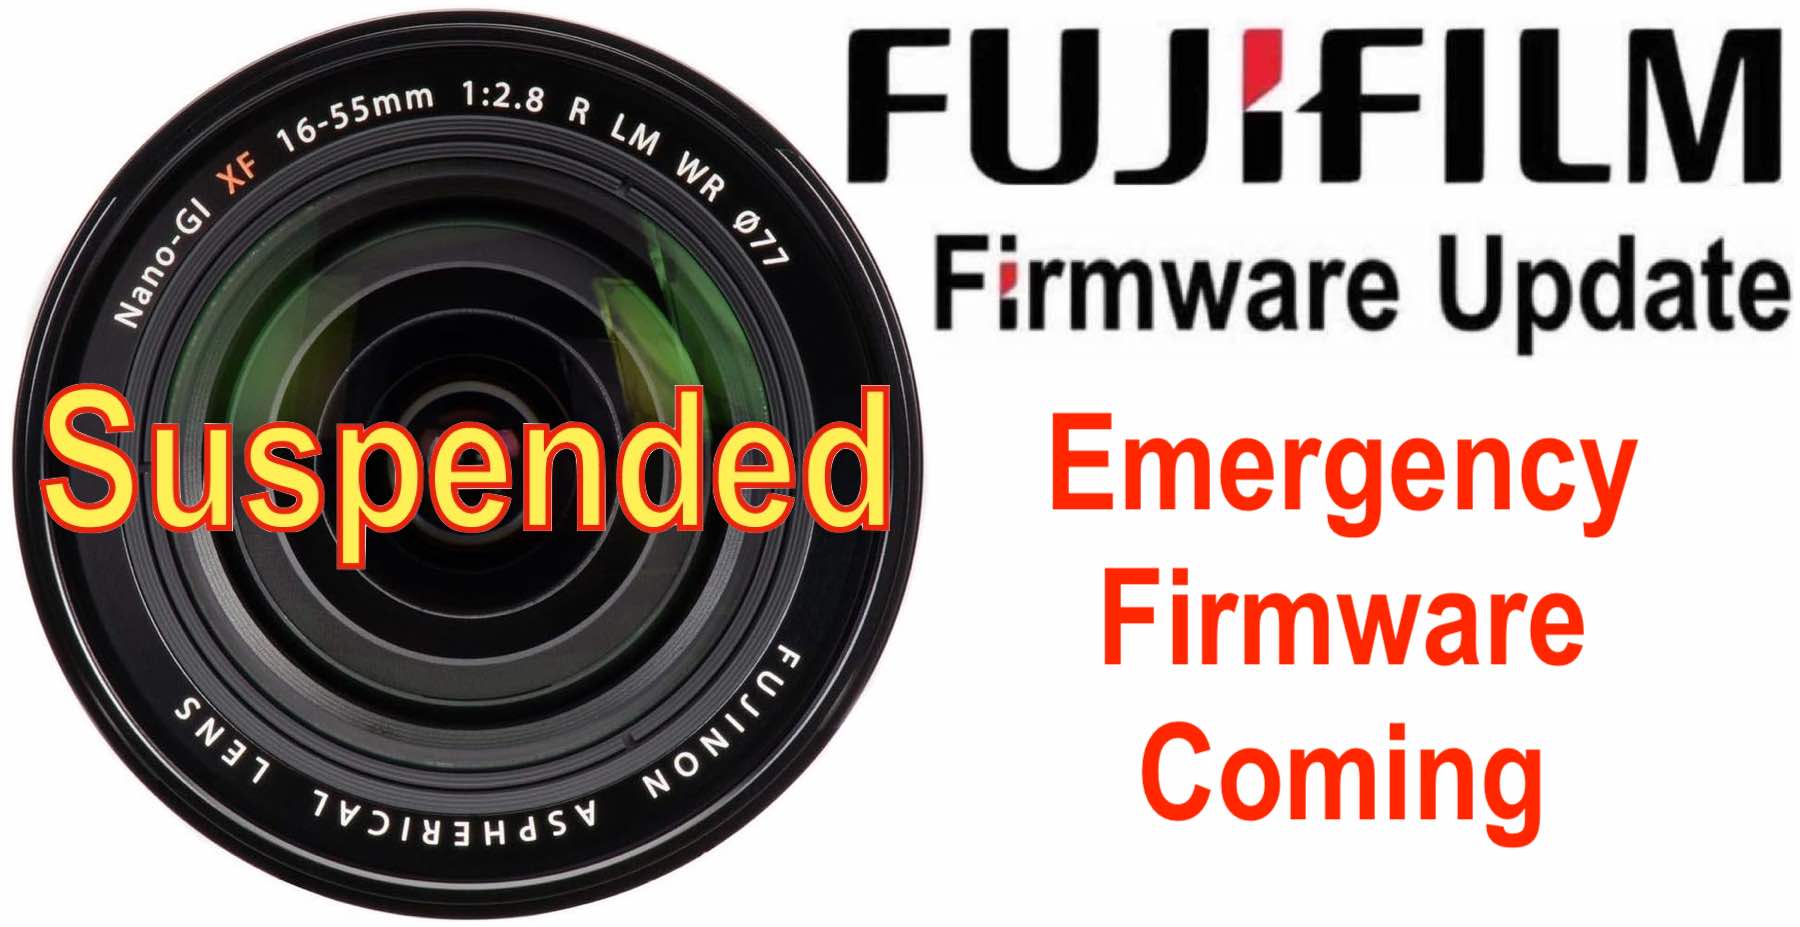 SUSPENDED: Fujifilm Removes Latest XF16-55mmF2.8 Firmware and 